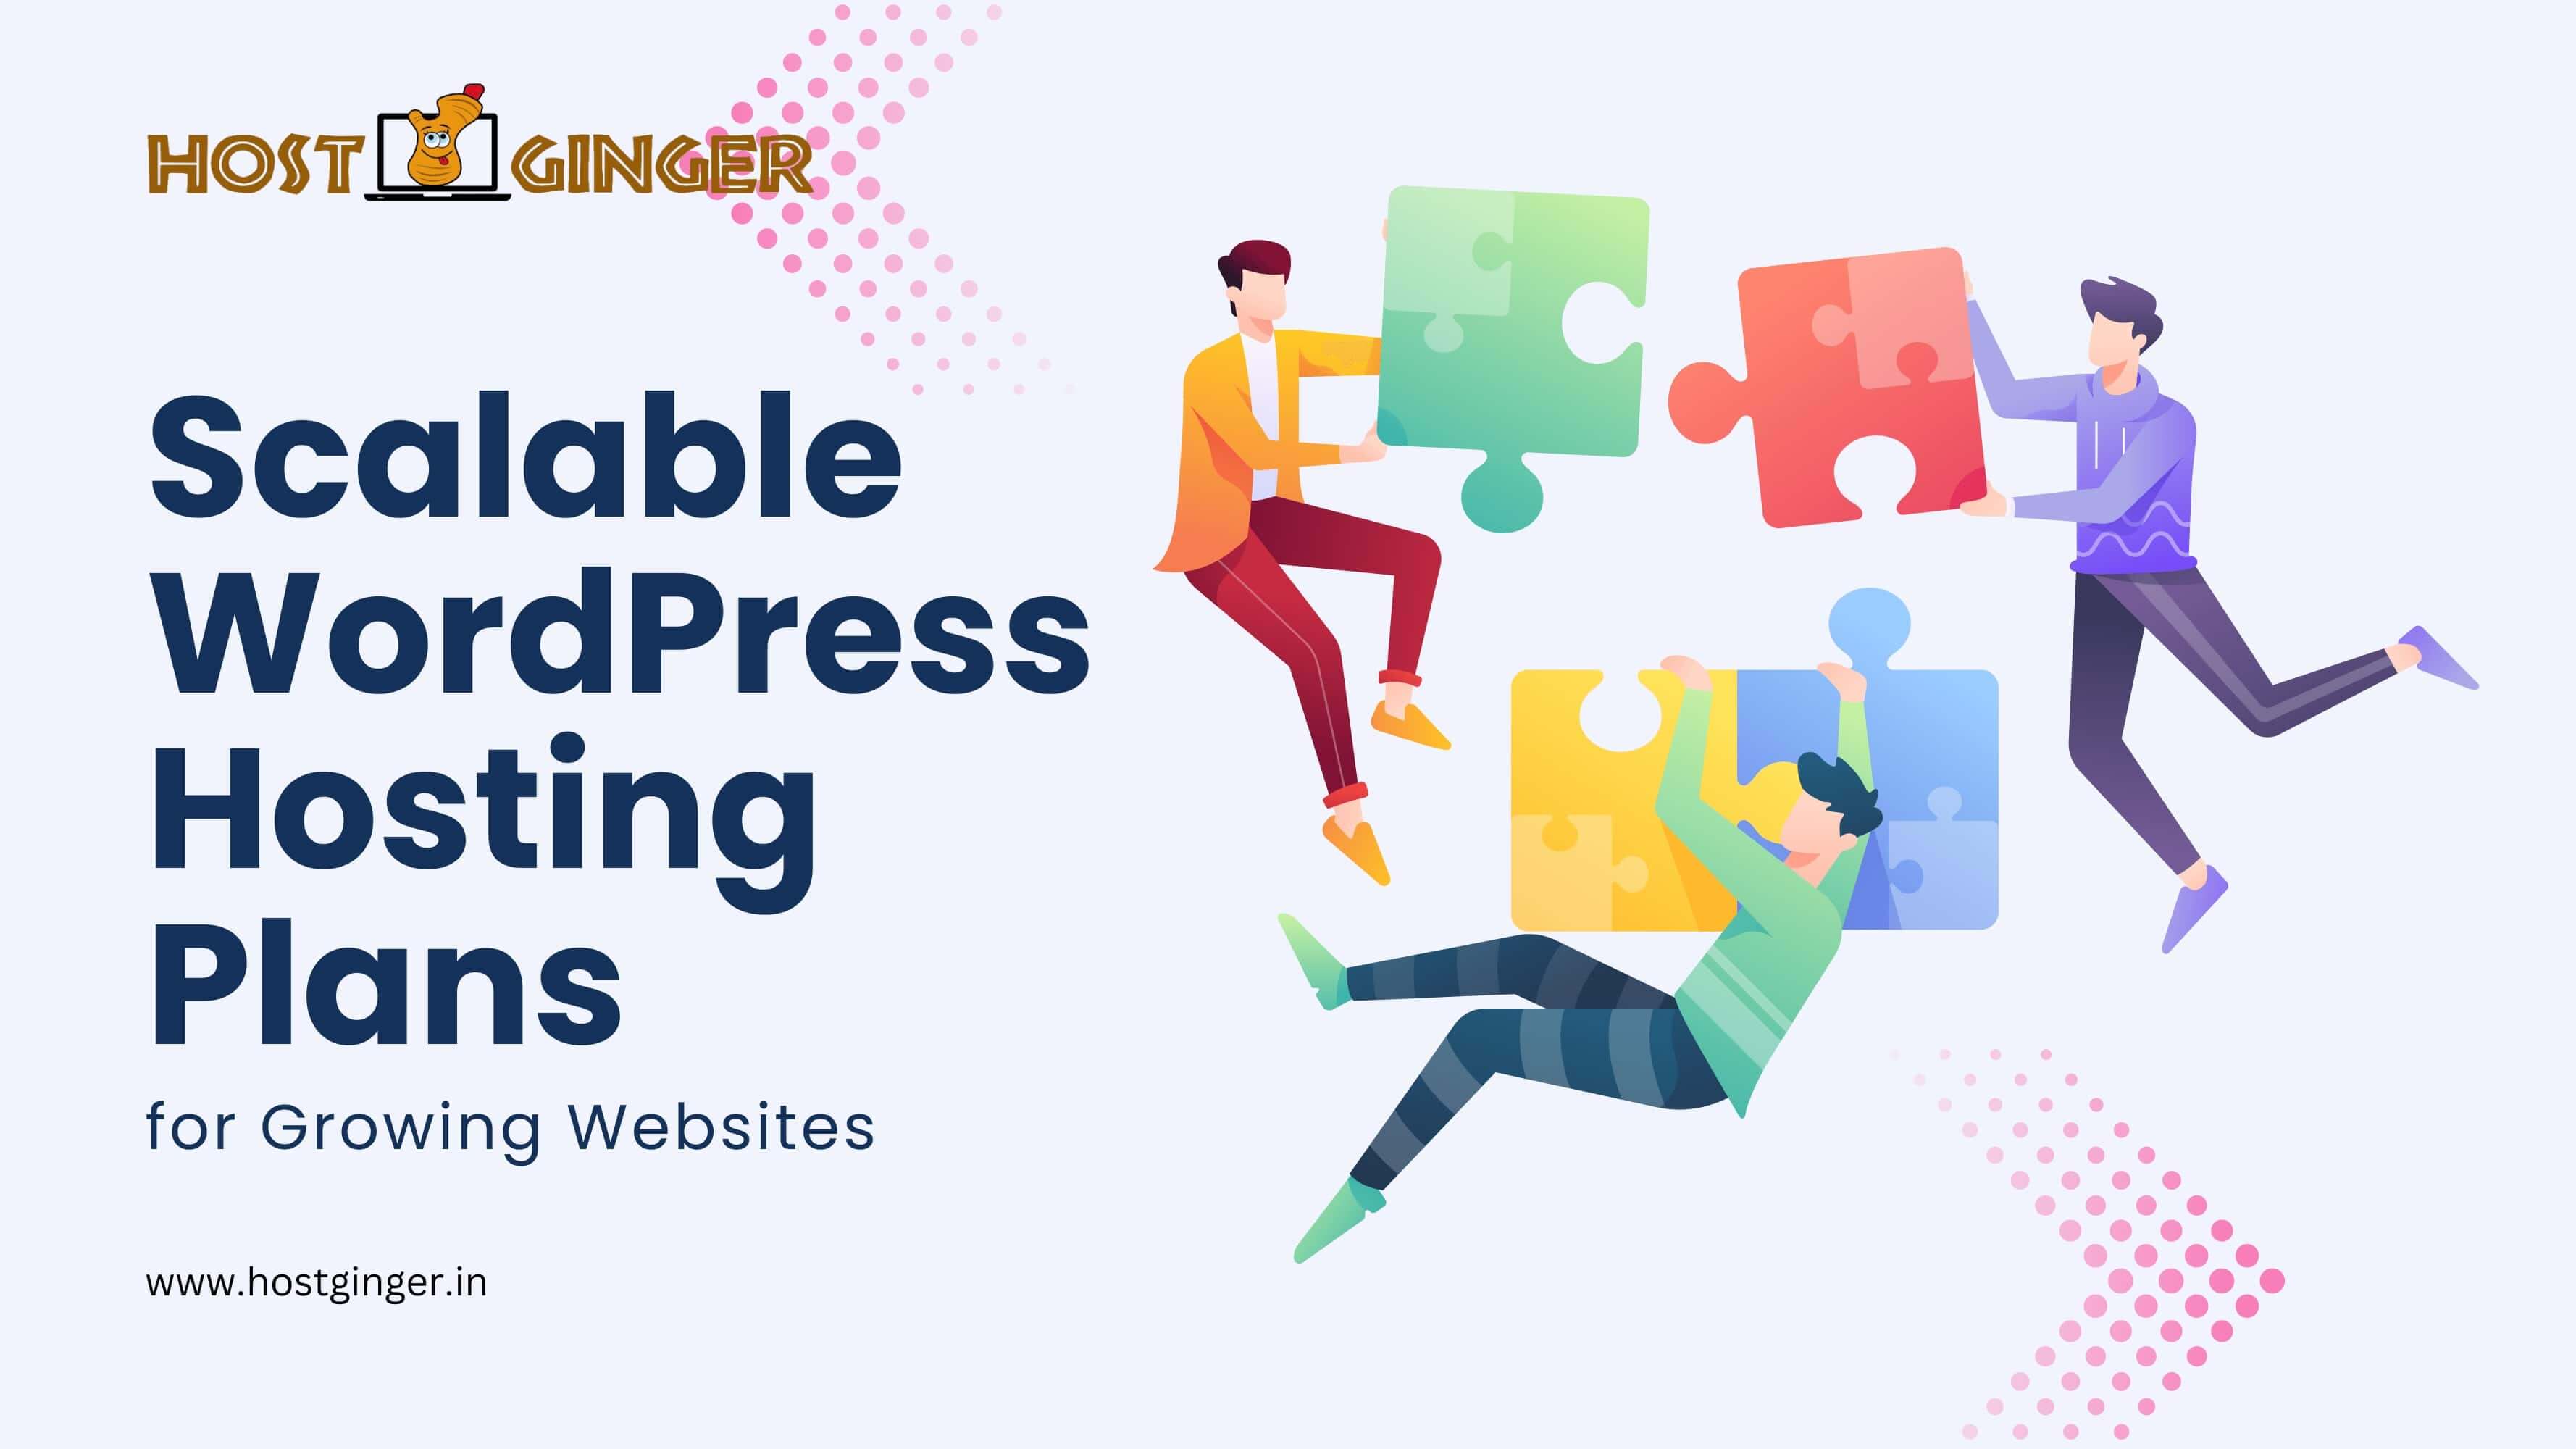 Scalable WordPress Hosting Plans for Growing Websites